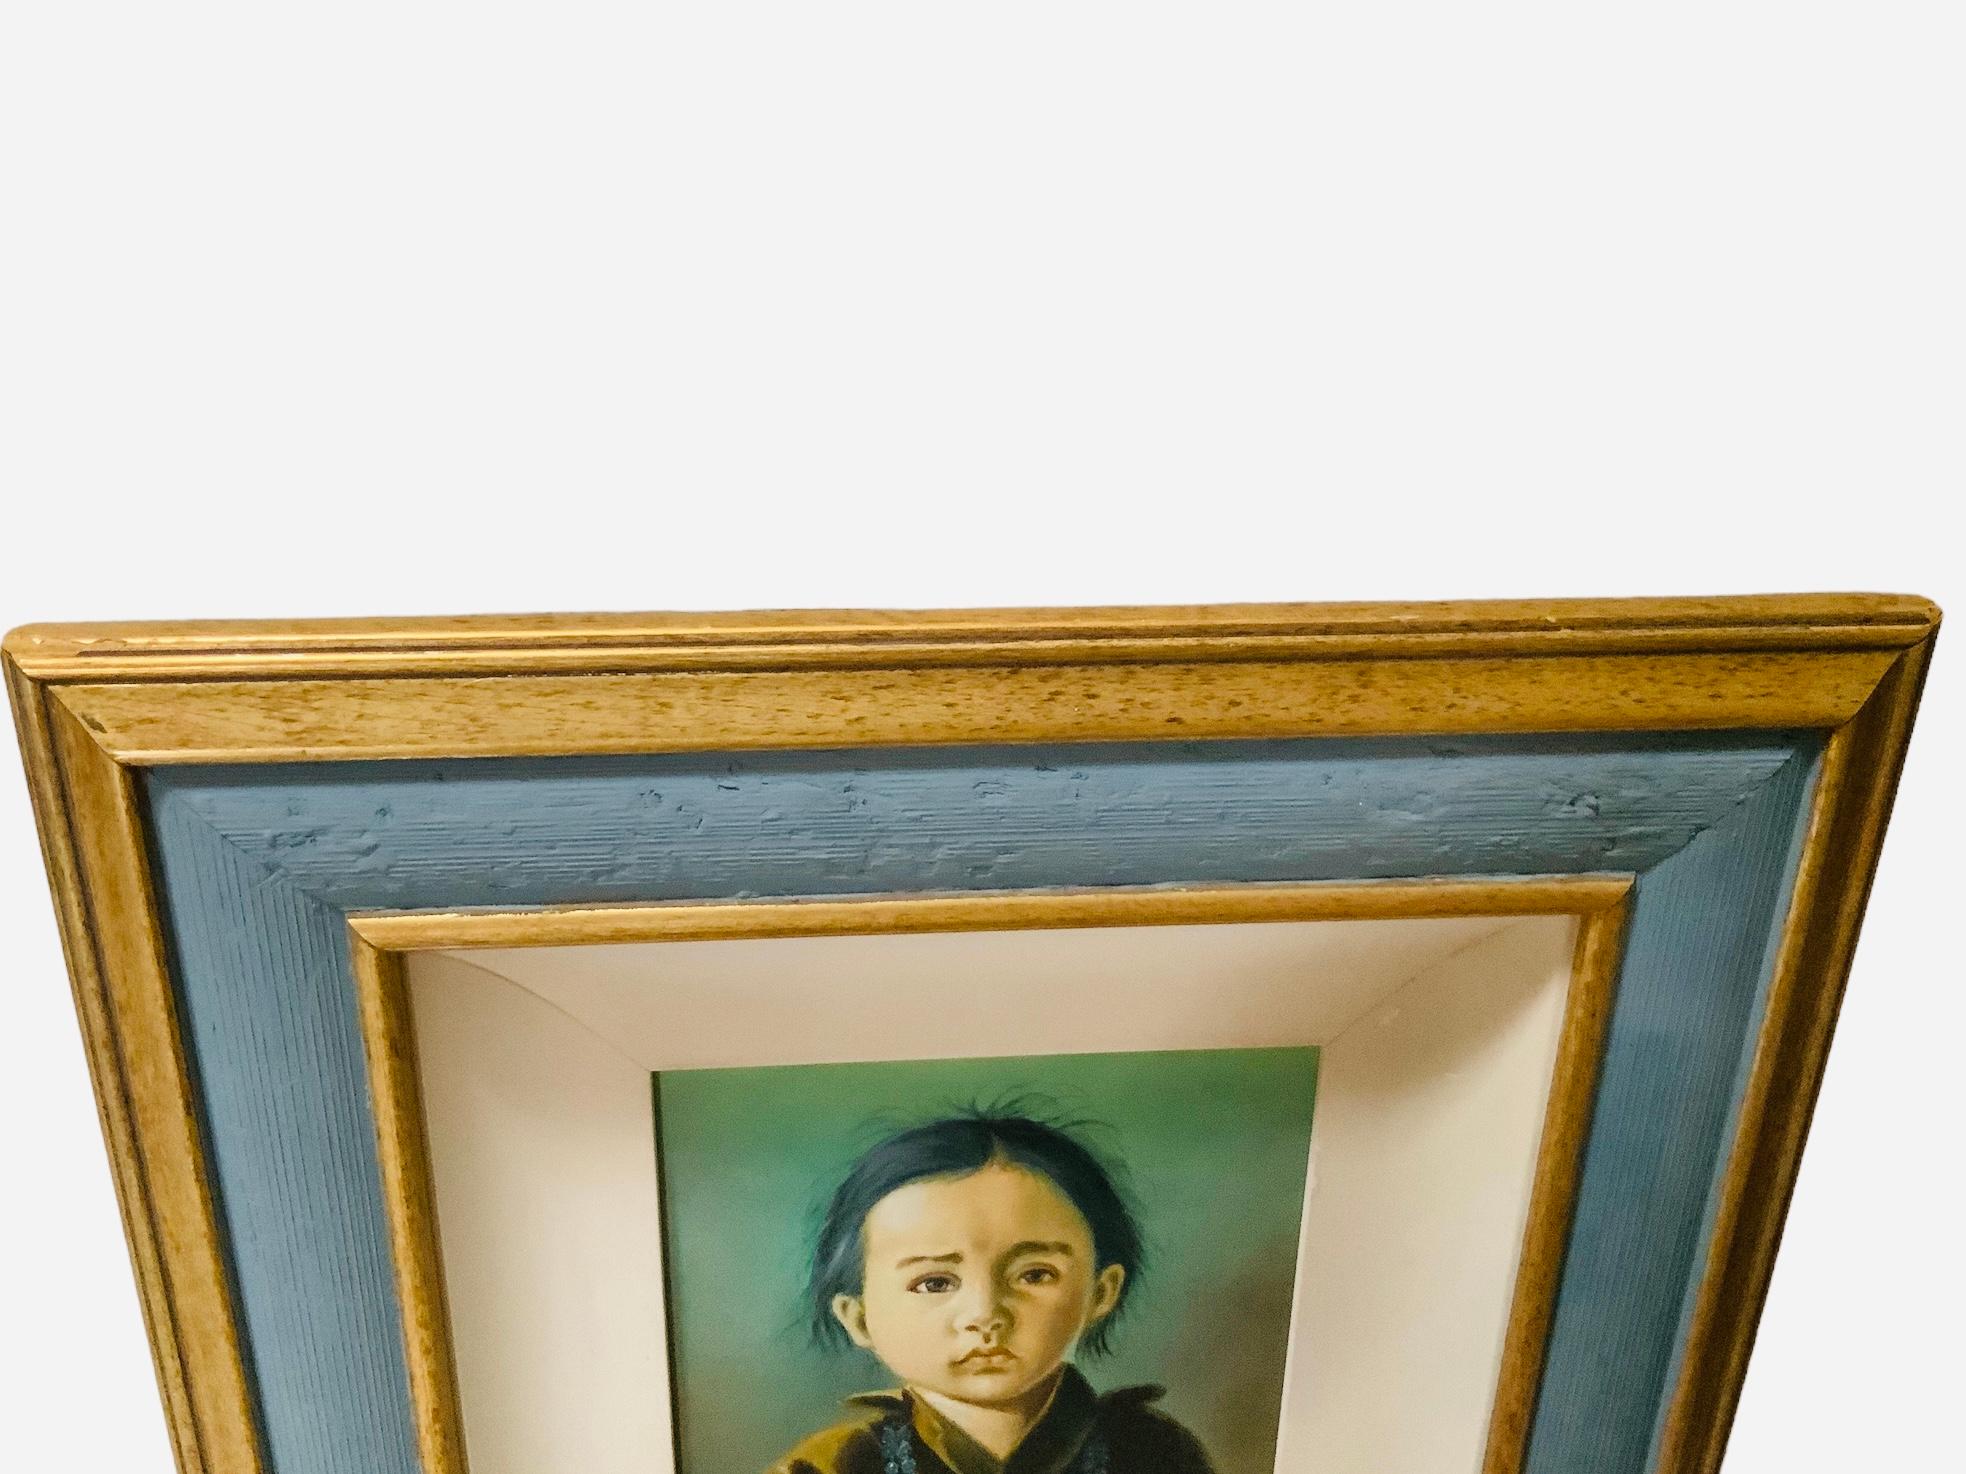 This is a Native American Boy Painting. It depicts a hand painted portrait of a Navajo child. He has black hair and very expressive brown eyes. He is wearing a dark brown shirt with a turquoise necklace. The painting is signed S or G. Miller in the